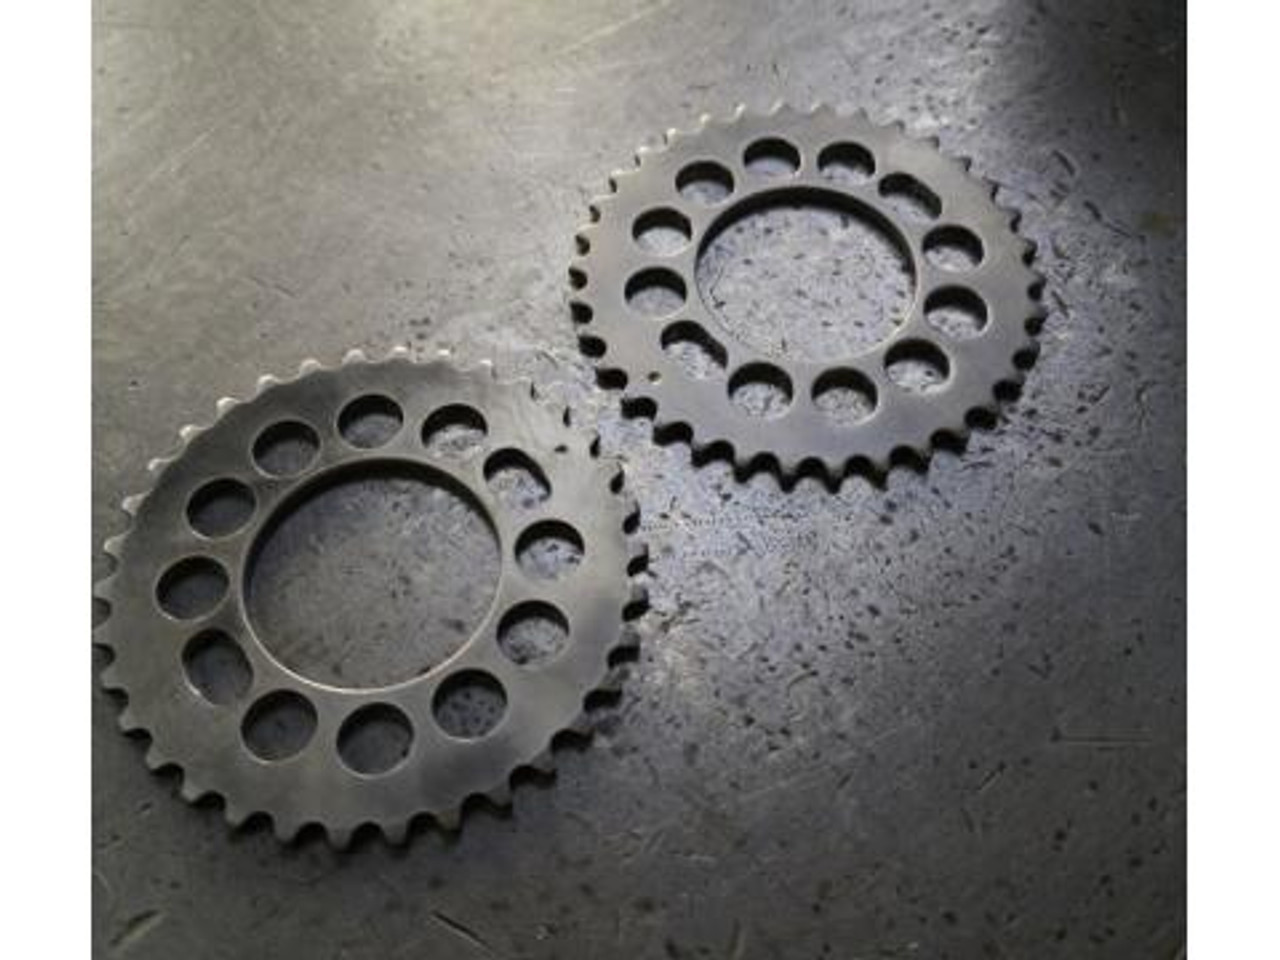 Yamaha FZR 400 3TJ 4DX Slotted Adjustable Cam Timing Gears,A must to be able to dial the cams in to the correct specification Price is for a set of 2